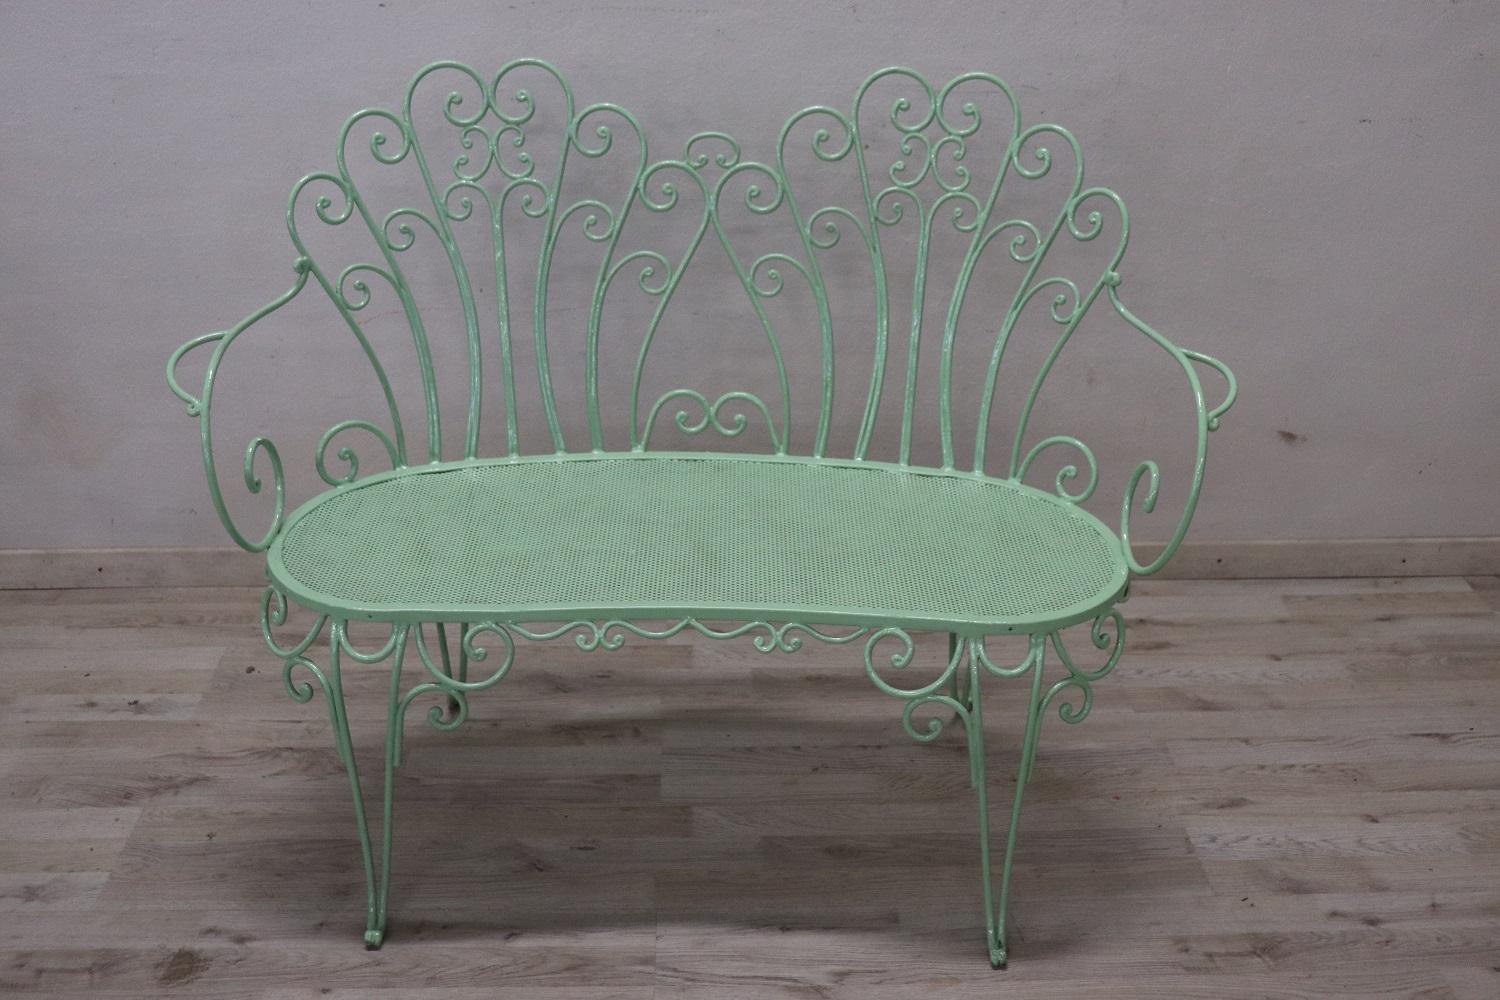 Beautiful refined garden set in circa 1930s. Two chairs, one settee and a round wrought iron table. Refined iron decoration with curls and swirls. The iron has been lacquered in a lovely light green shade. This garden set is perfect for embellishing